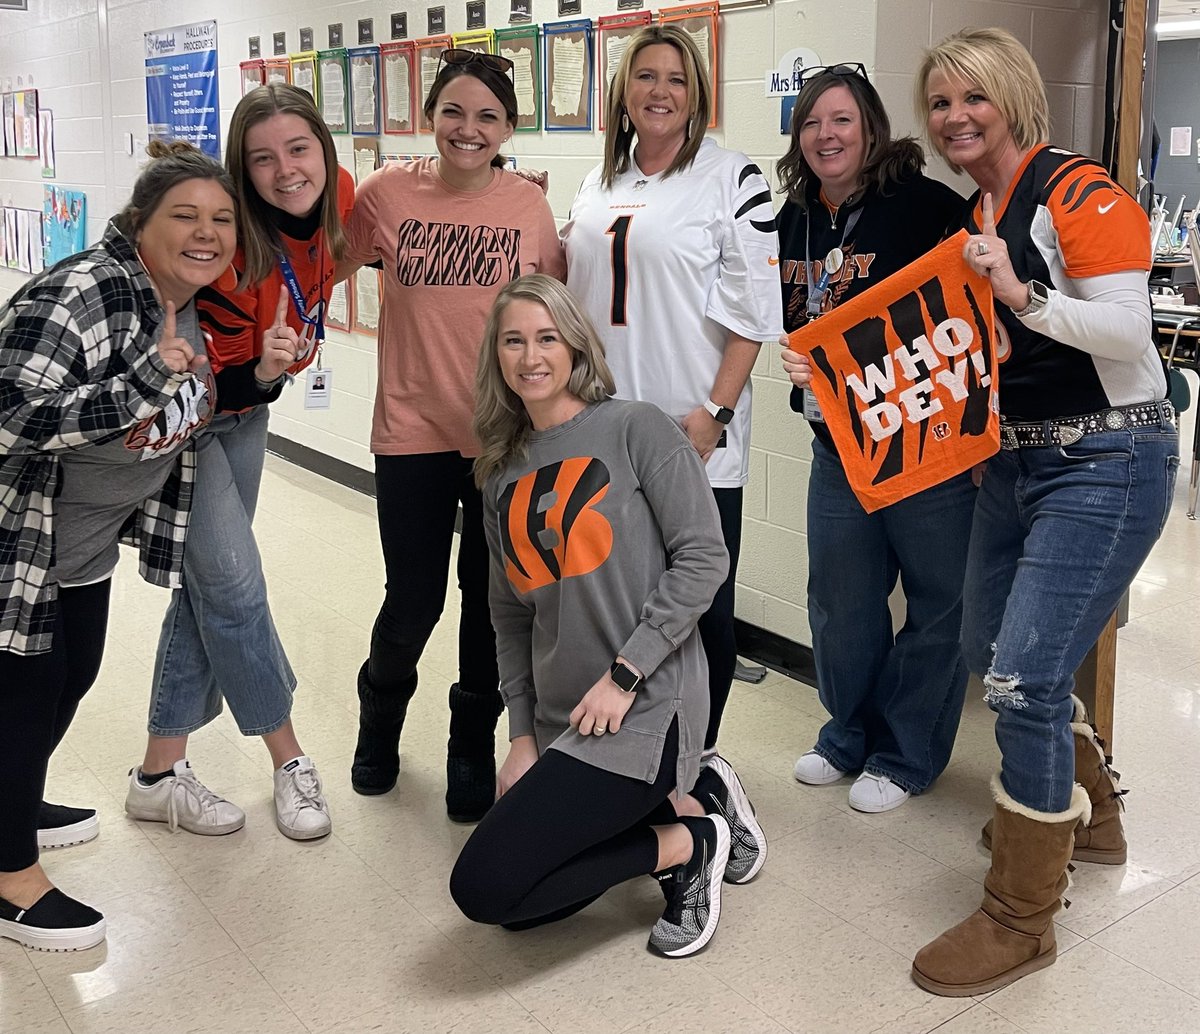 Tonya Hare on Twitter: "Erpenbeck Elementary wants to say Who DEY